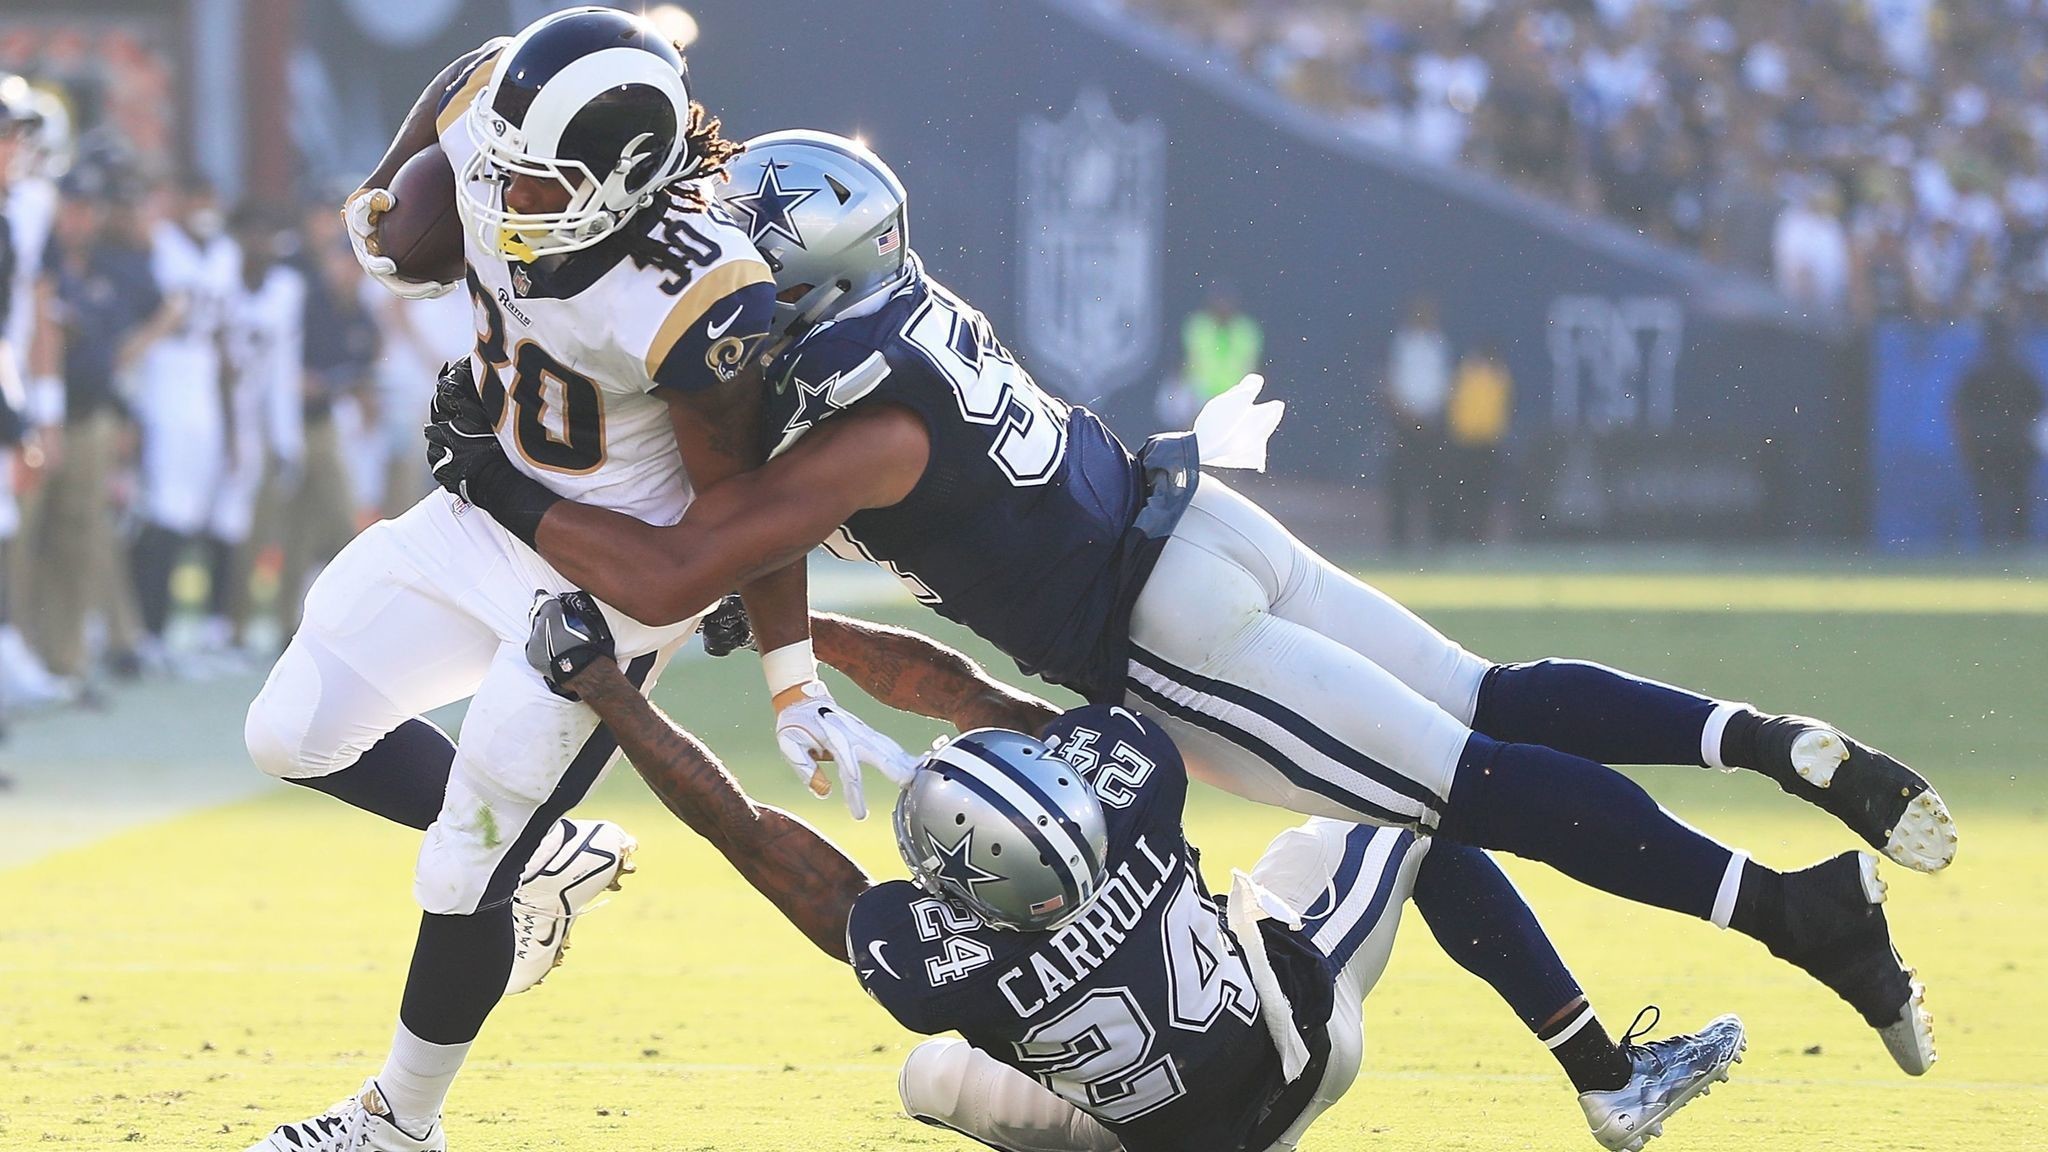 Rams running back Todd Gurley will get more carries during preseason, Coach Sean McVay says – LA Times